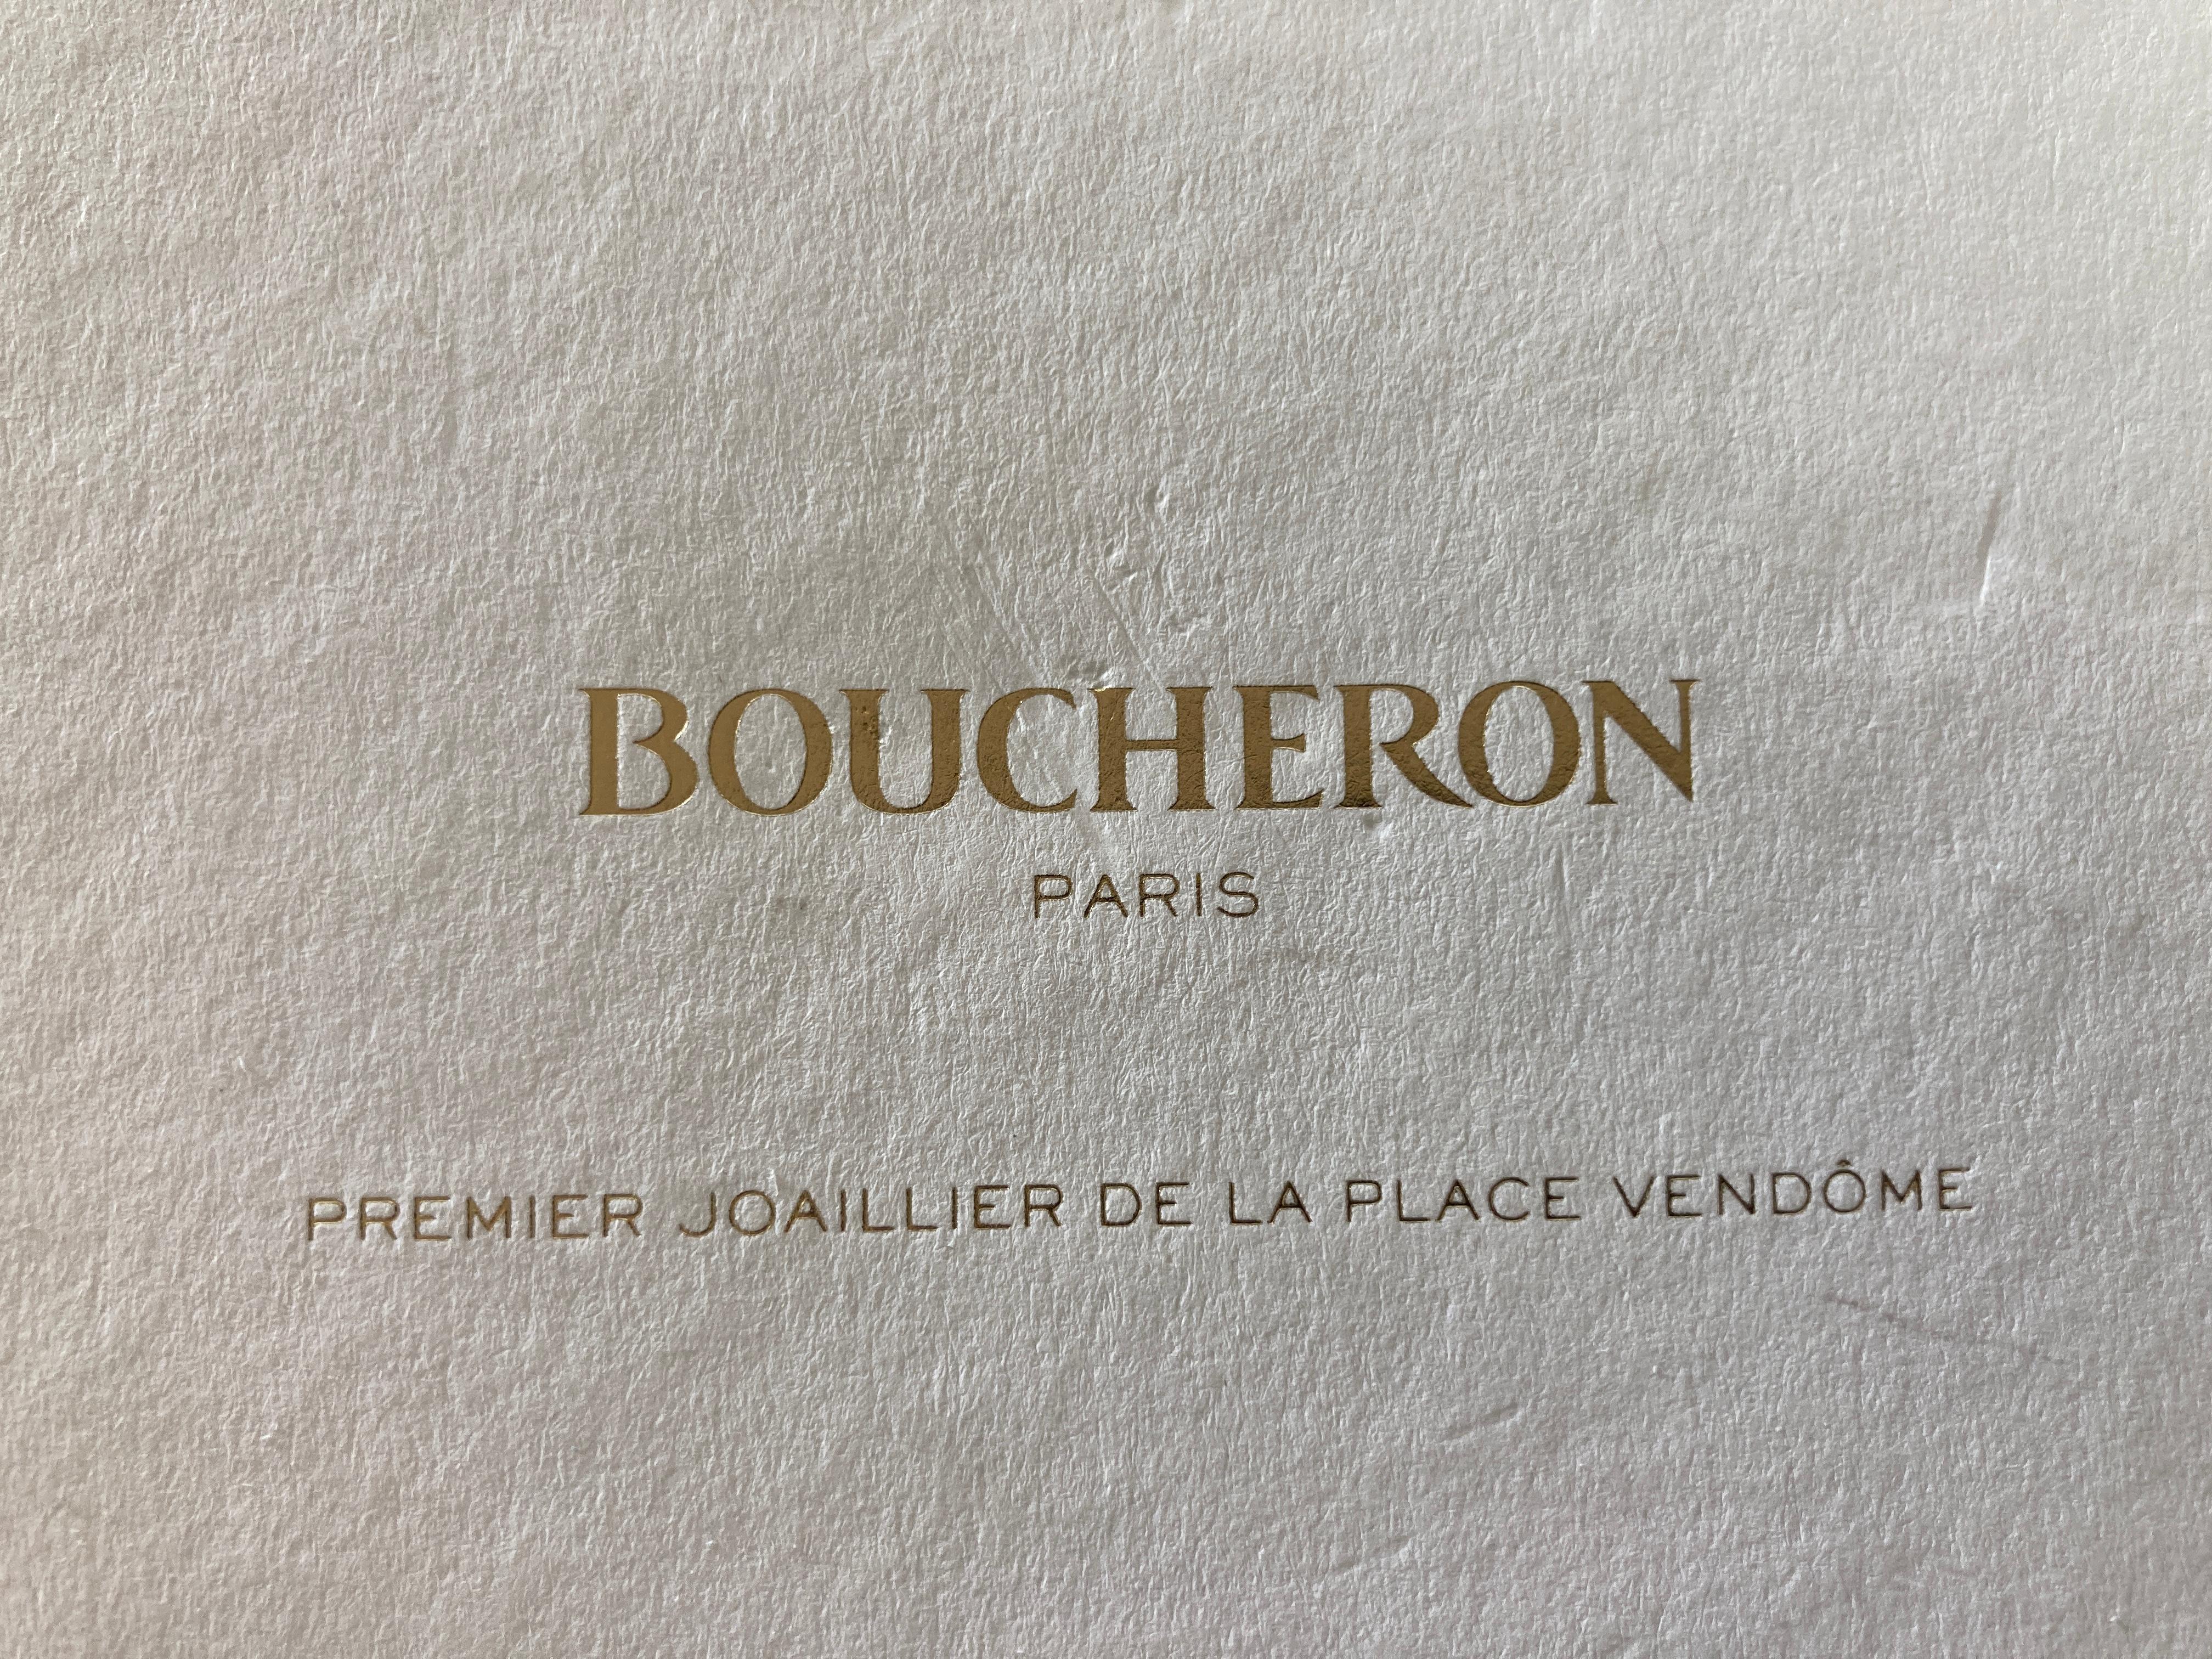 French Boucheron Paris First Art Jeweler of the Place Vendome Hardcover Book